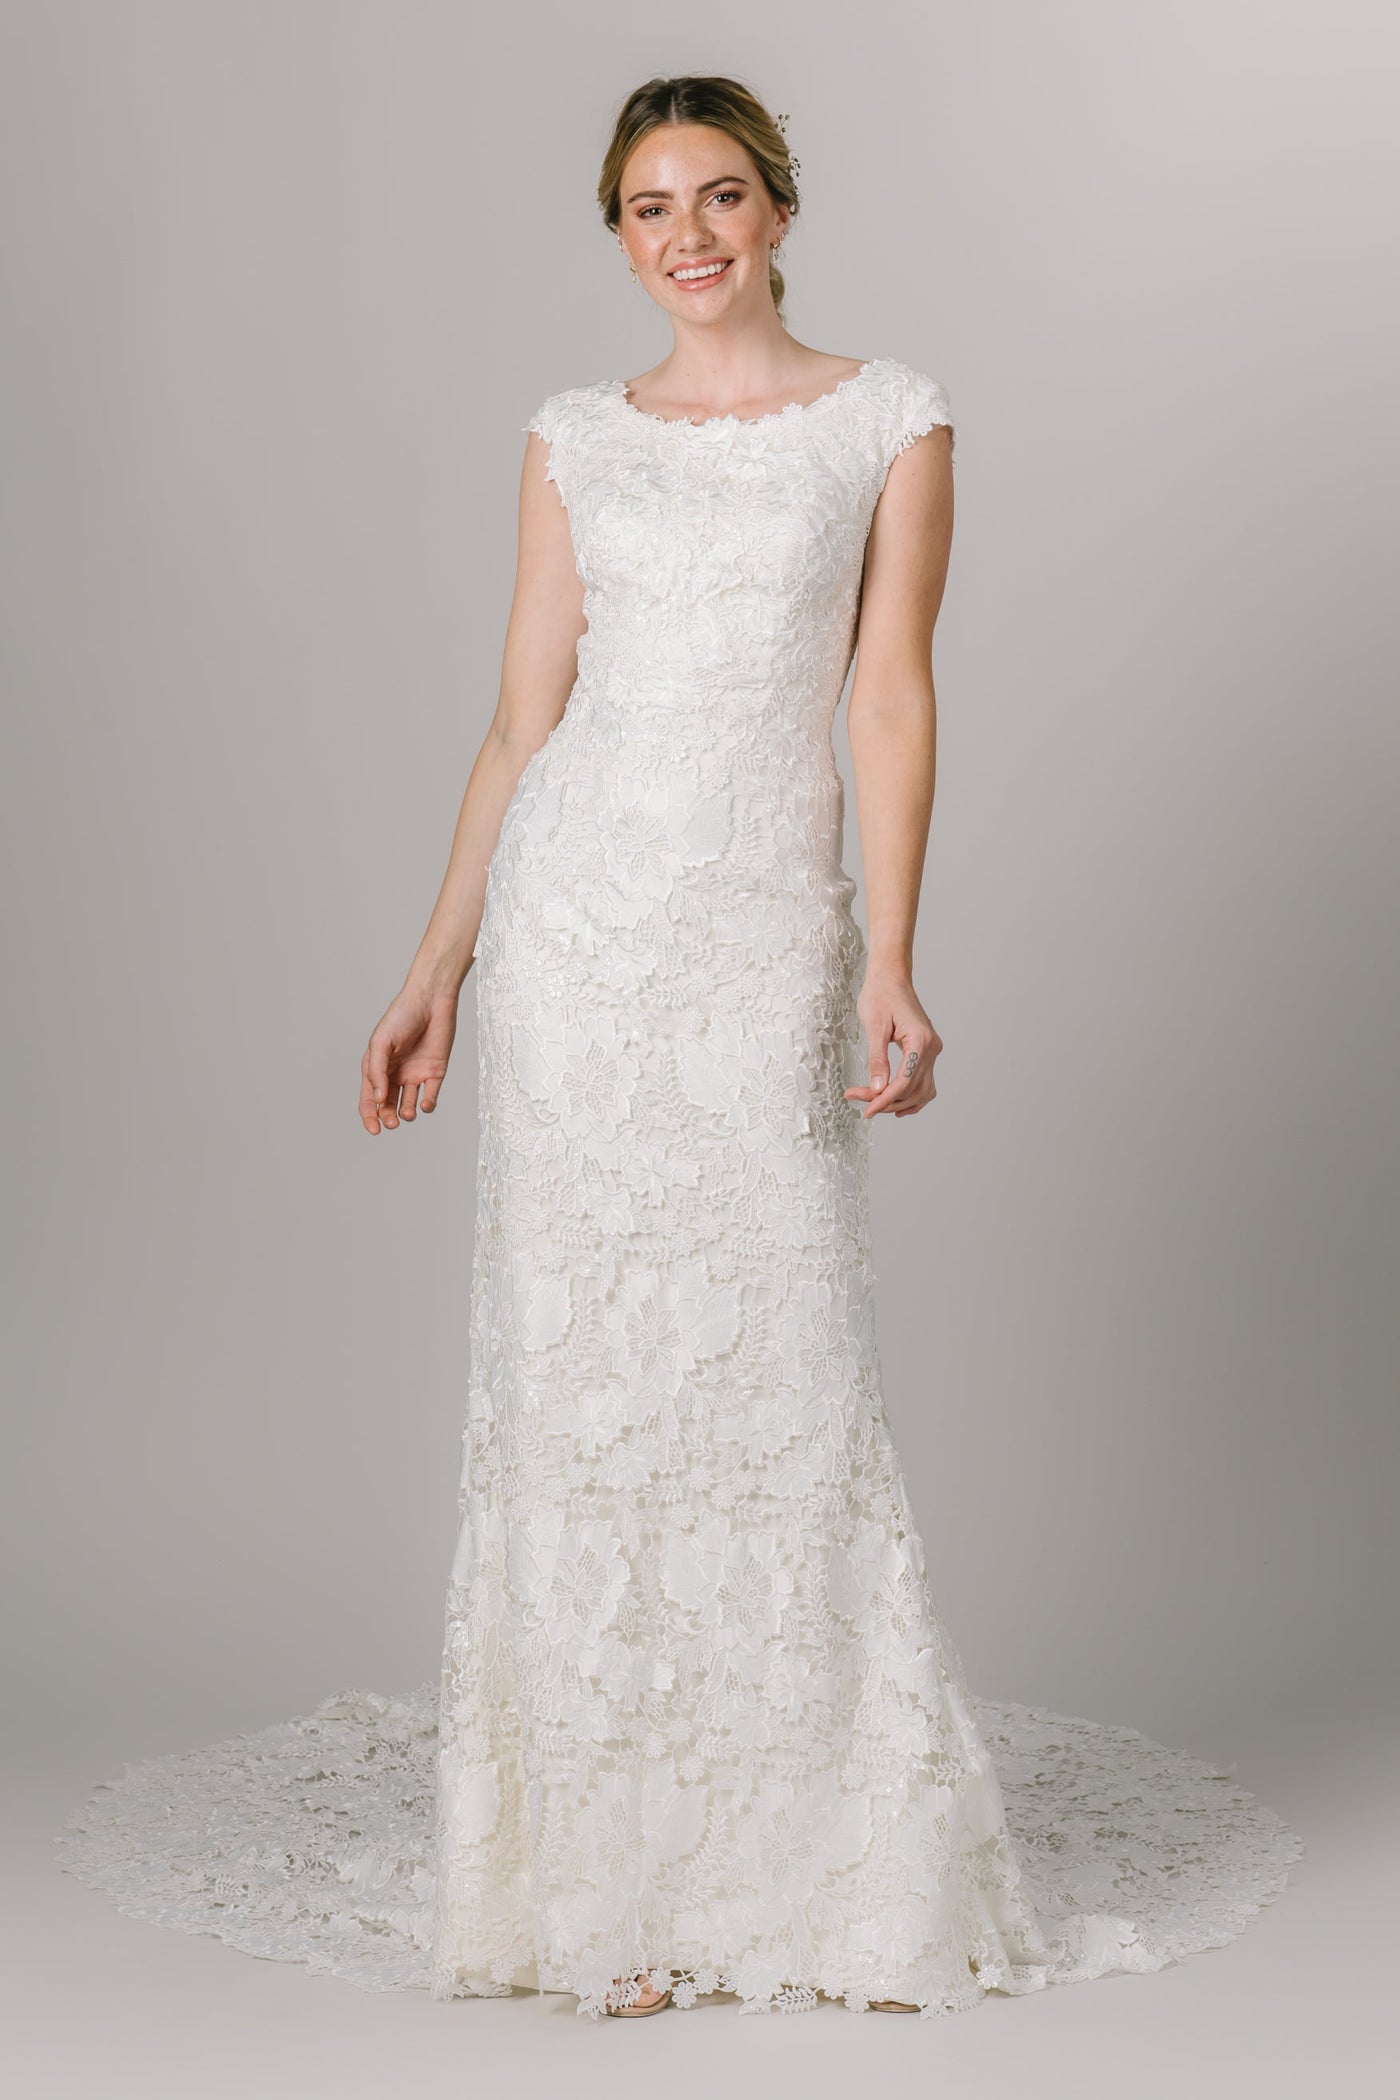 This Modest Wedding Dress features short sleeves, a round neck and an  all over lace. - Modest Wedding Dresses - Modest Clothing - Modest Dresses - LatterDayBride